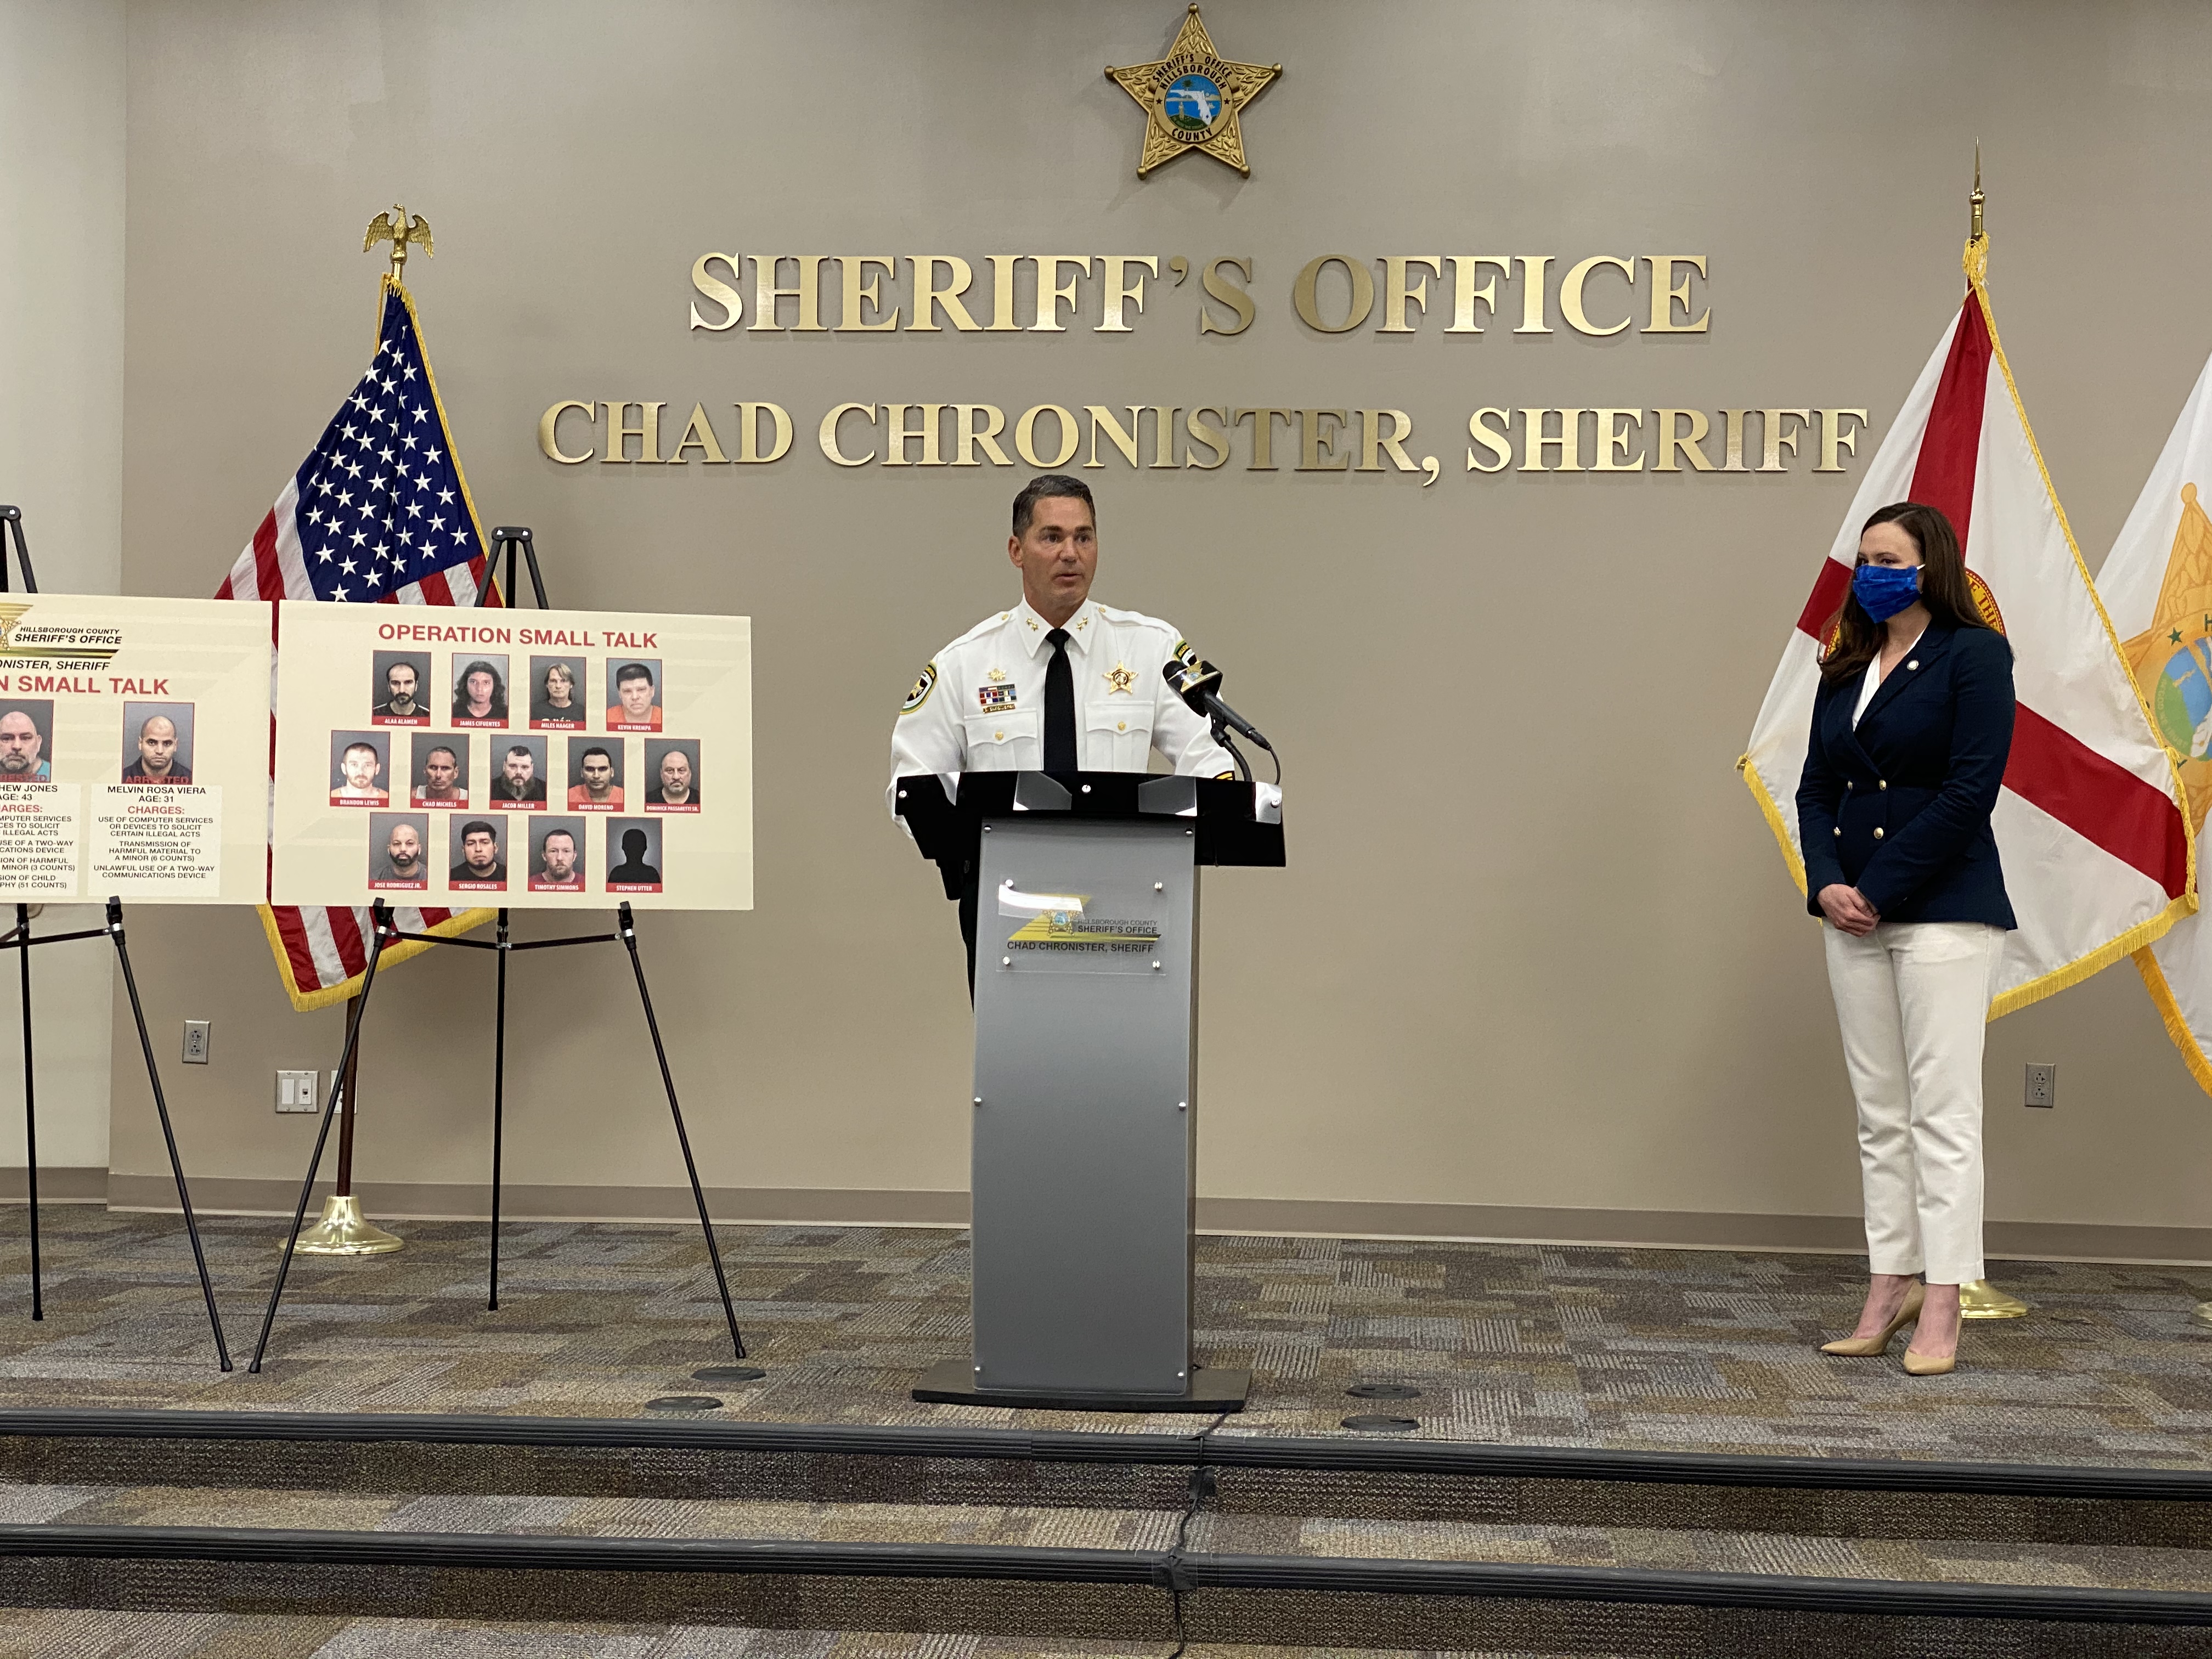 Operation Small Talk: Sheriff Chad Chronister, AG Ashley Moody discuss results of online chat operation